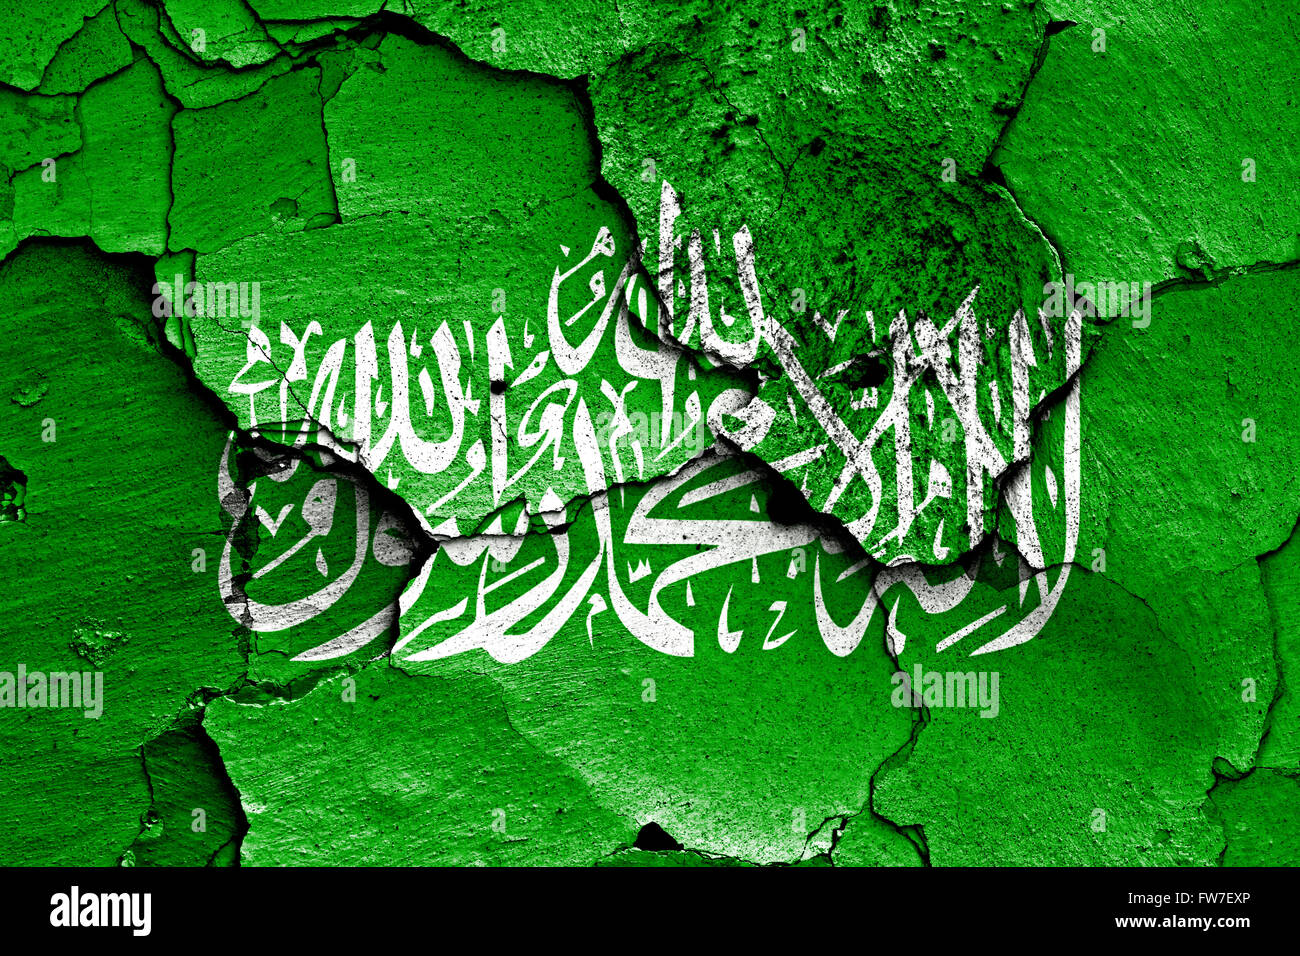 flag of Hamas painted on cracked wall Stock Photo